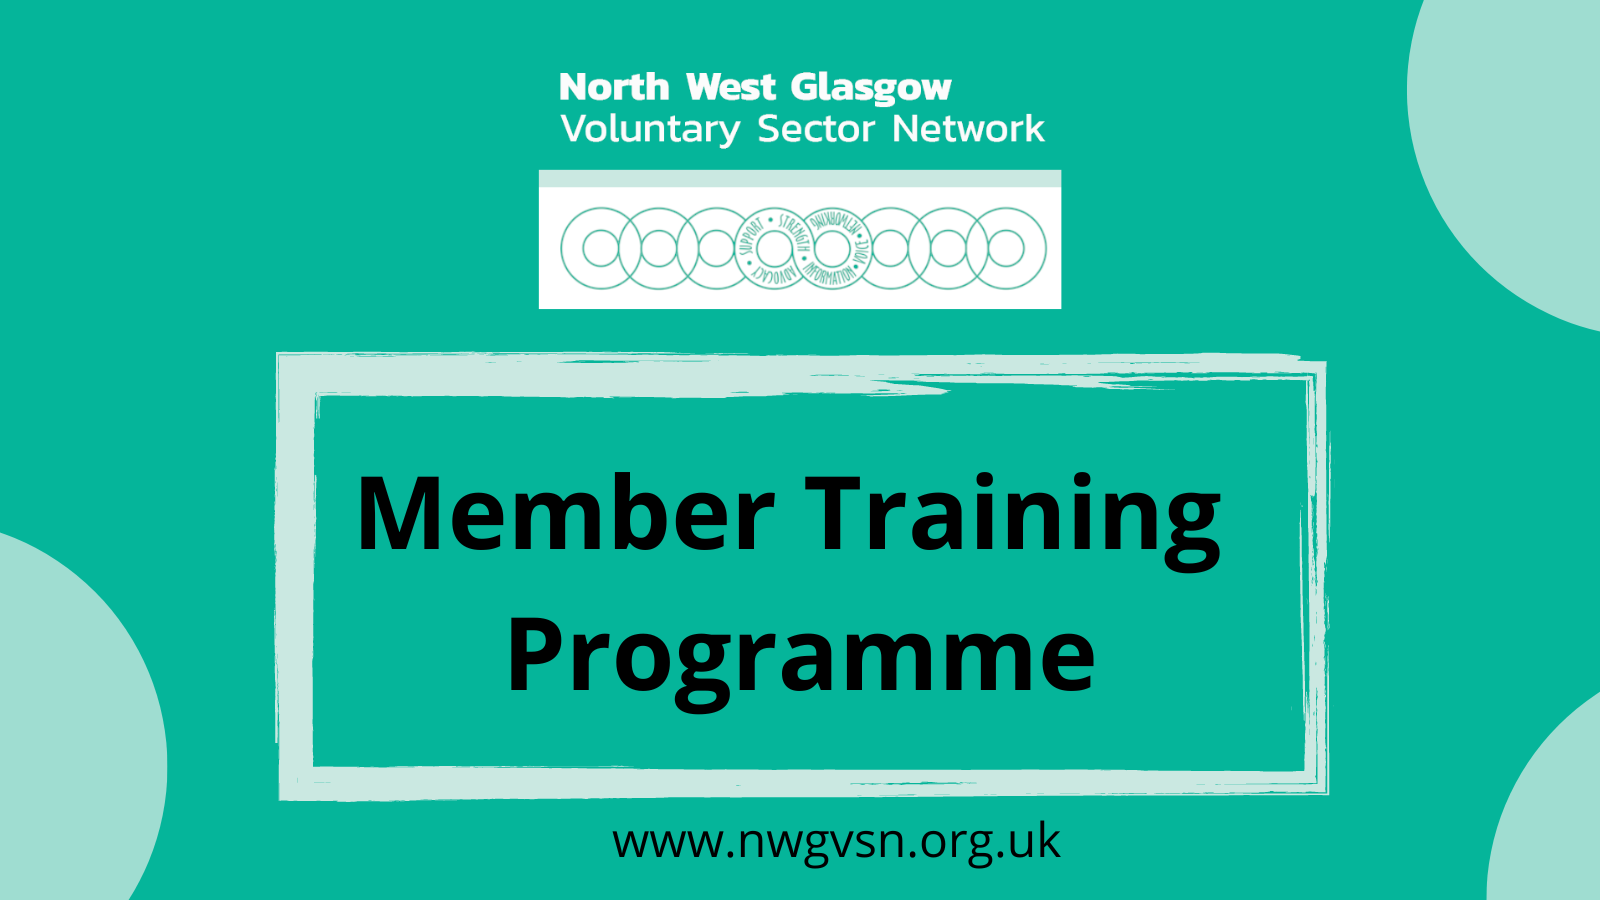 Light green box with black text saying Member Training Programme